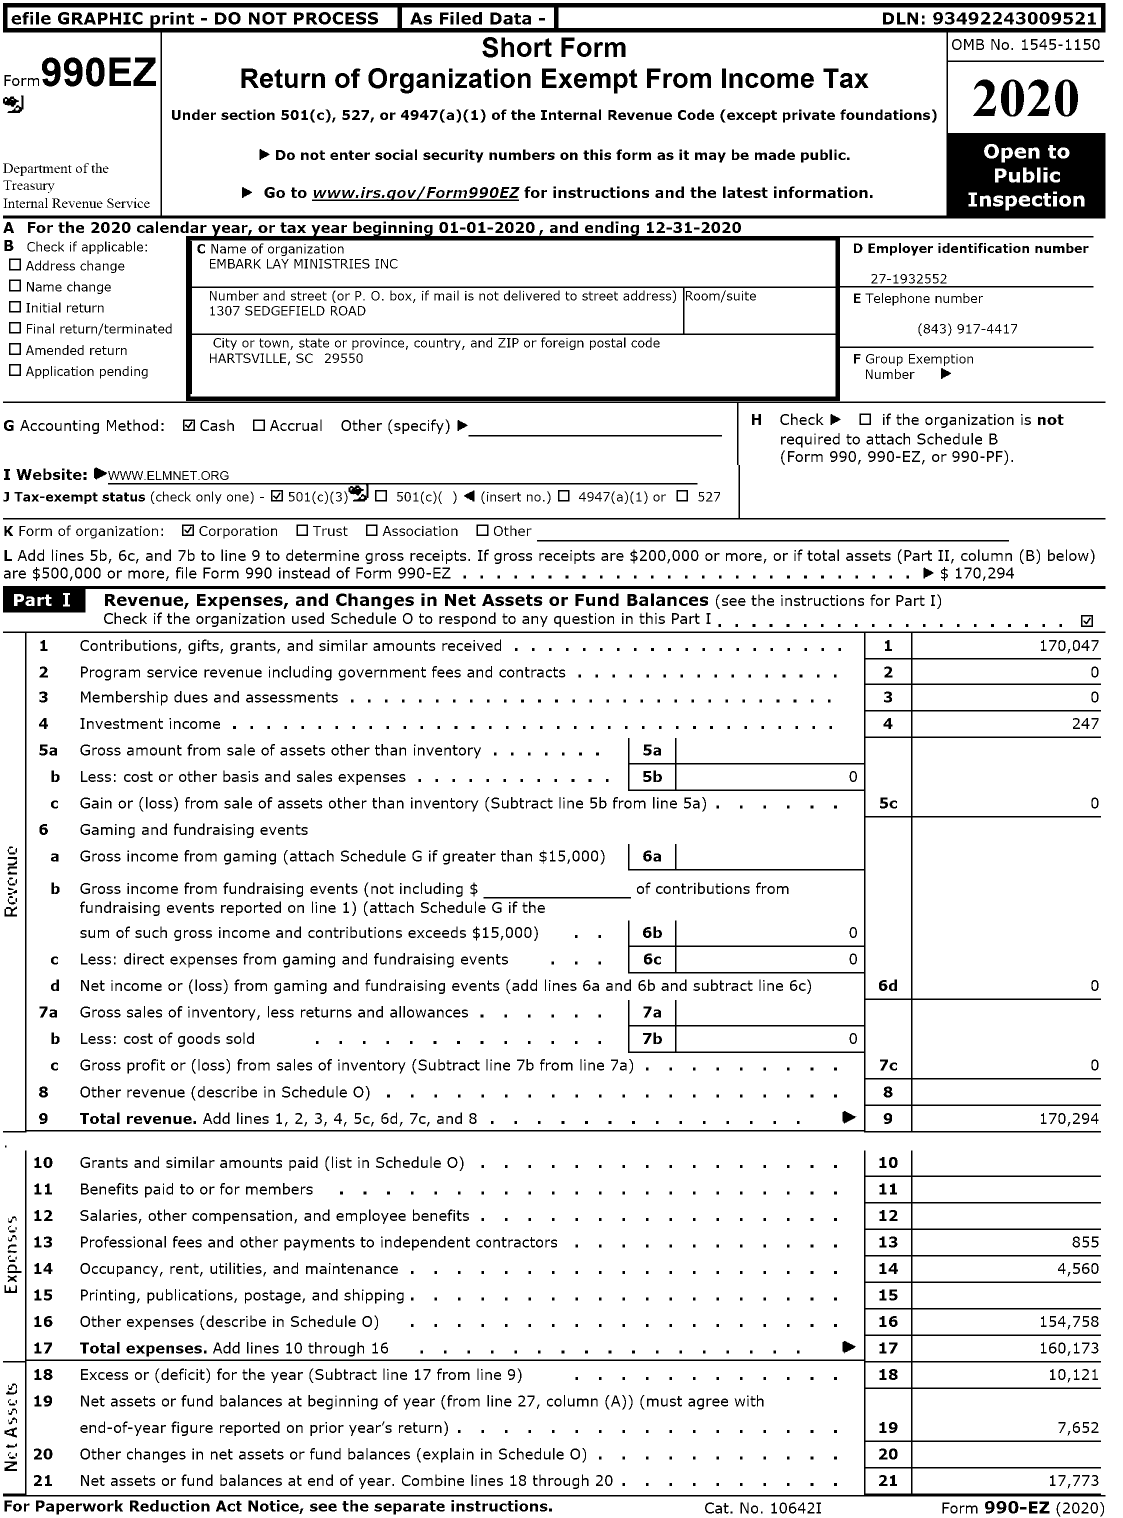 Image of first page of 2020 Form 990EZ for Embark Lay Ministries